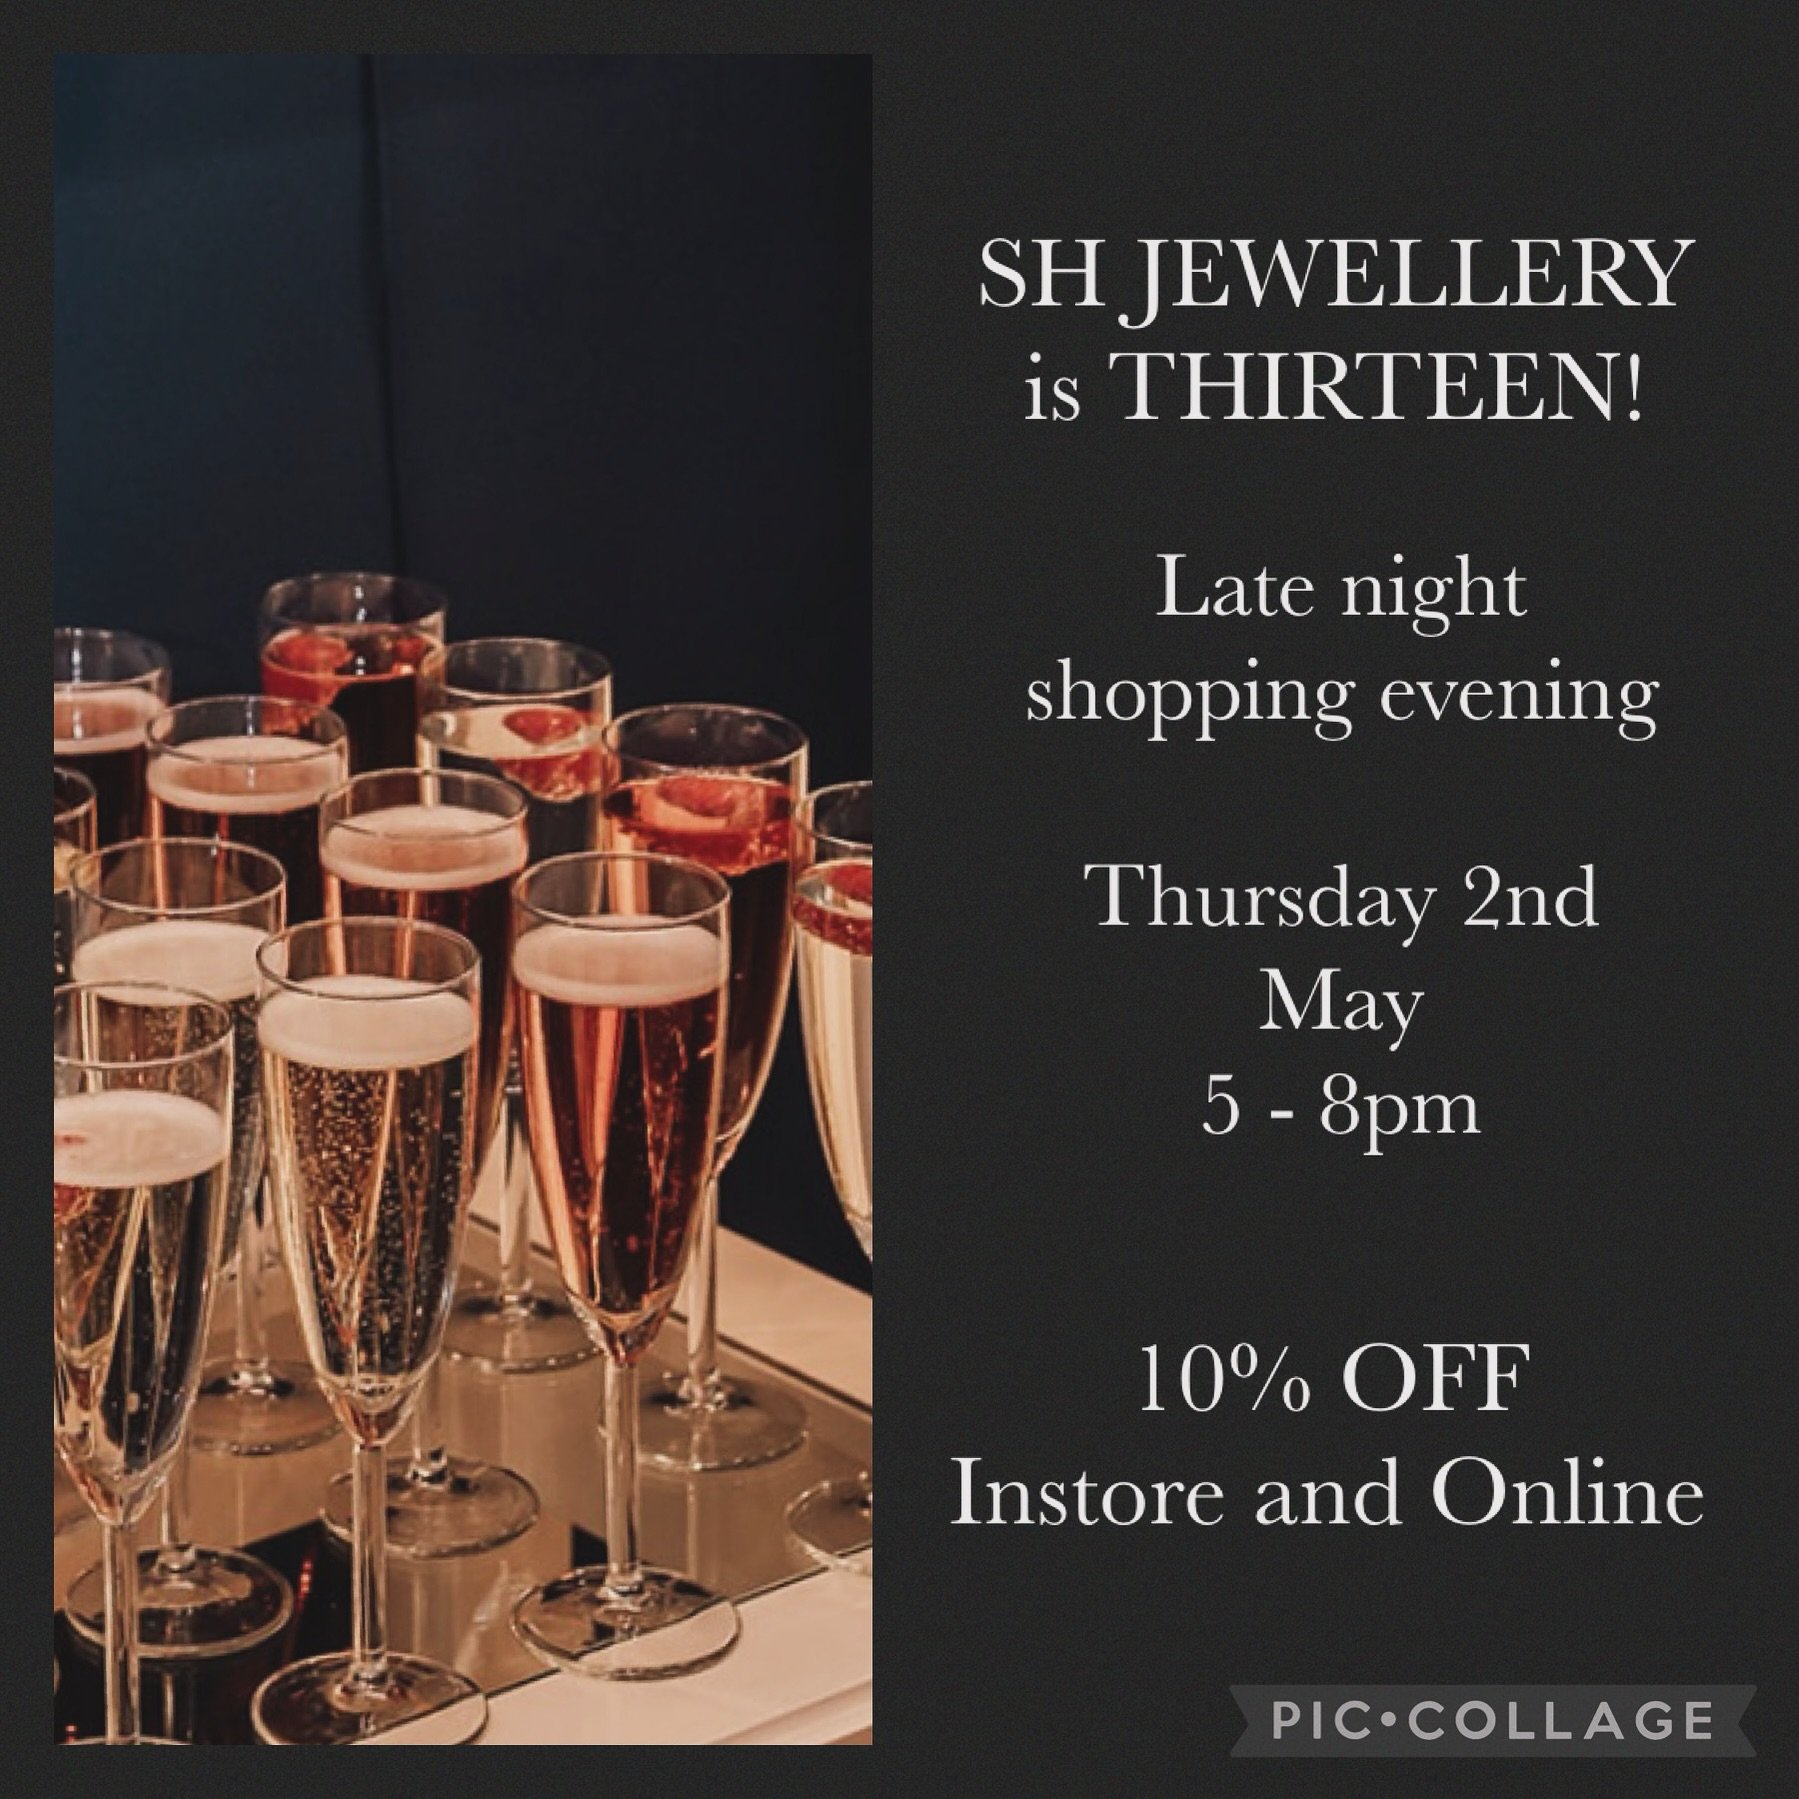 We turn 13 this week! Thirteen whole years of SH Jewellery and we couldn&rsquo;t be happier to celebrate this milestone with you all 🥂
We have our late night shopping event this Thursday the 2nd May, 5 - 8pm so pop along for a glass of bubbles and e